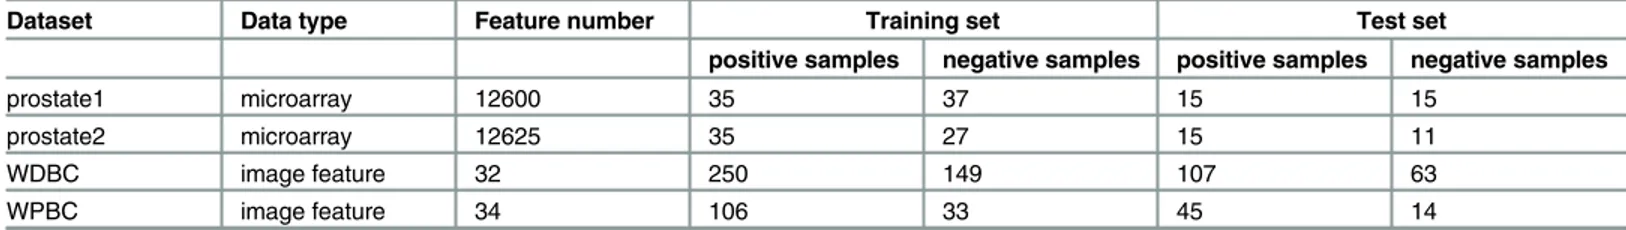 Table 4. Datasets: Training set and test set are divided randomly at a ratio of 7:3.